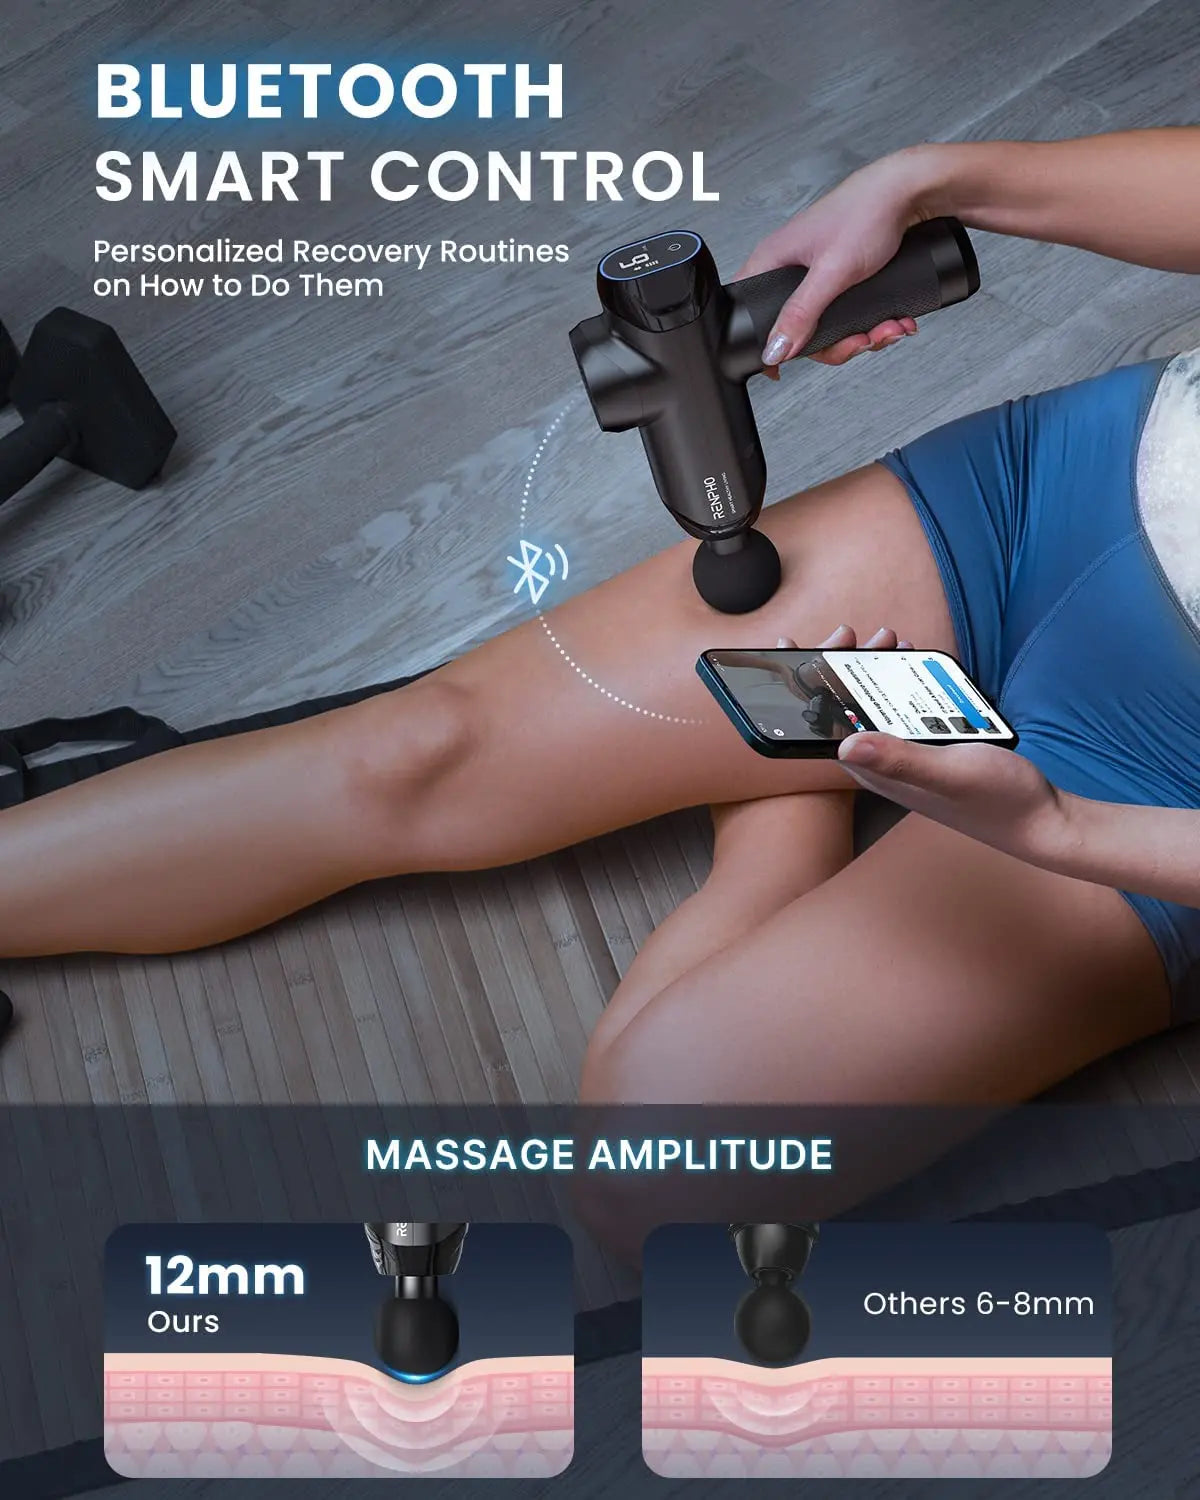 A person uses a black RENPHO Power Massage Gun on their thigh while holding a smartphone displaying an app. Text reads, "BLUETOOTH SMART CONTROL, Personalized Recovery Routines on How to Do Them." Below is a comparison of massage amplitude, showing "12mm Ours" versus "Others 6-8mm." Dumbbells are visible in the background.
